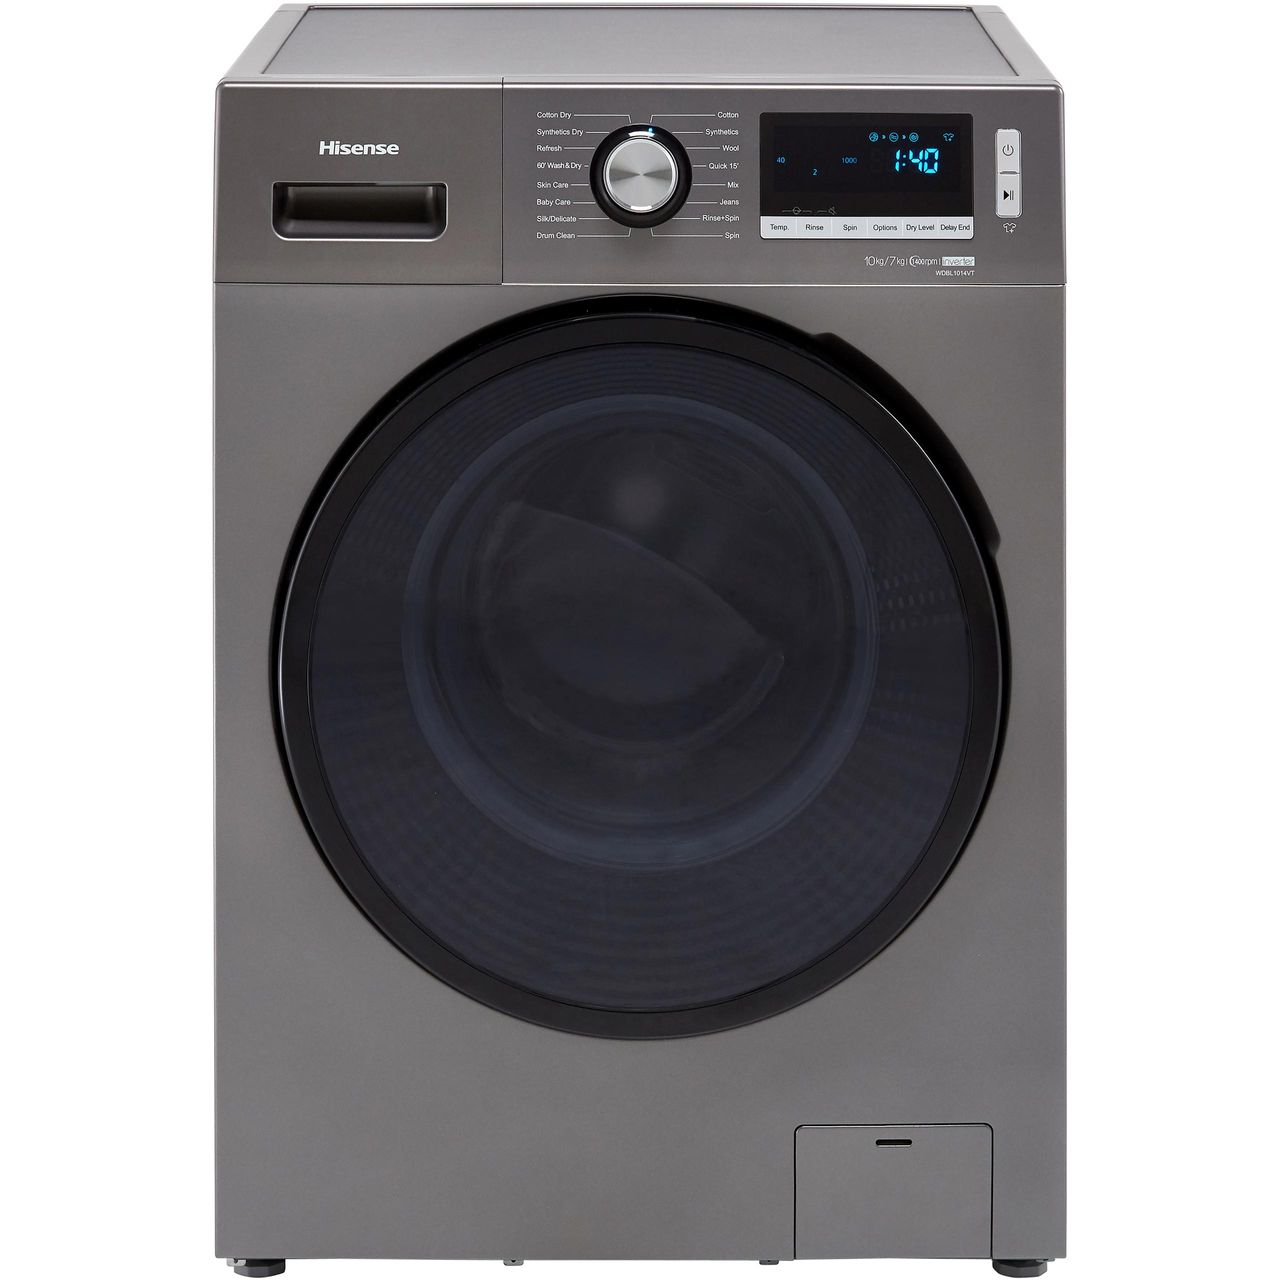 Hisense WDBL1014VT 10Kg / 7Kg Washer Dryer with 1400 rpm Review